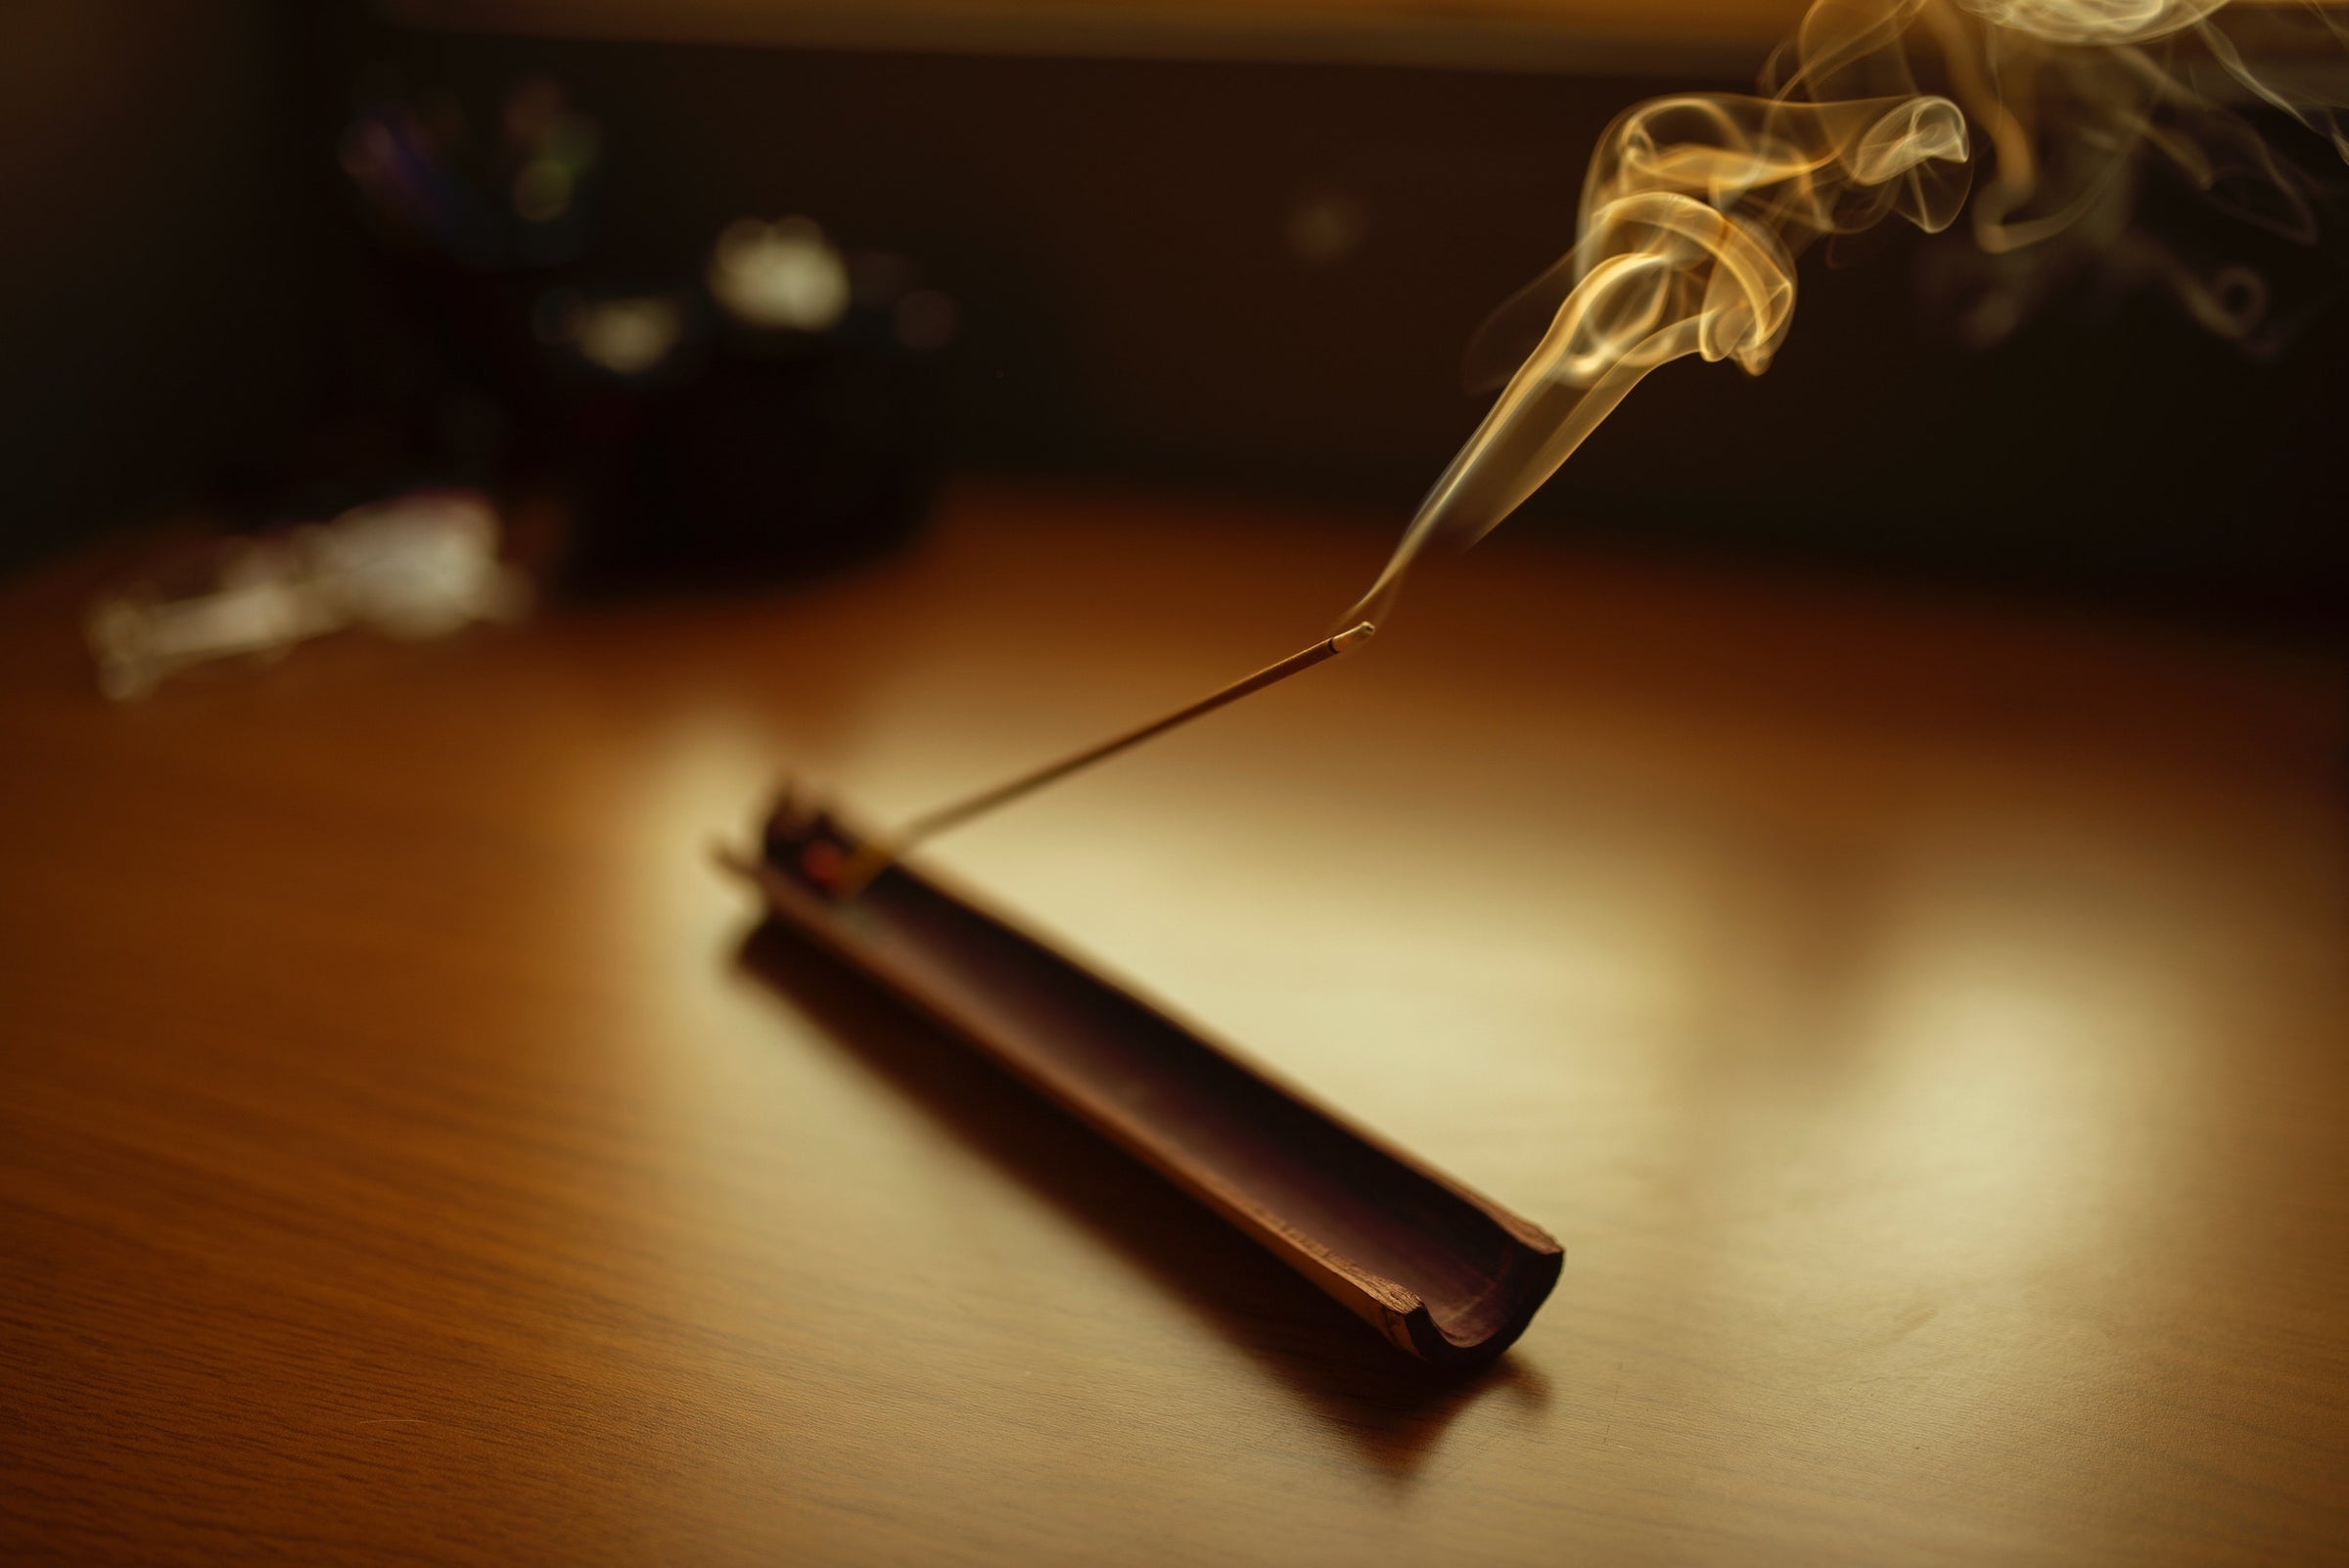 Incense burning on table 